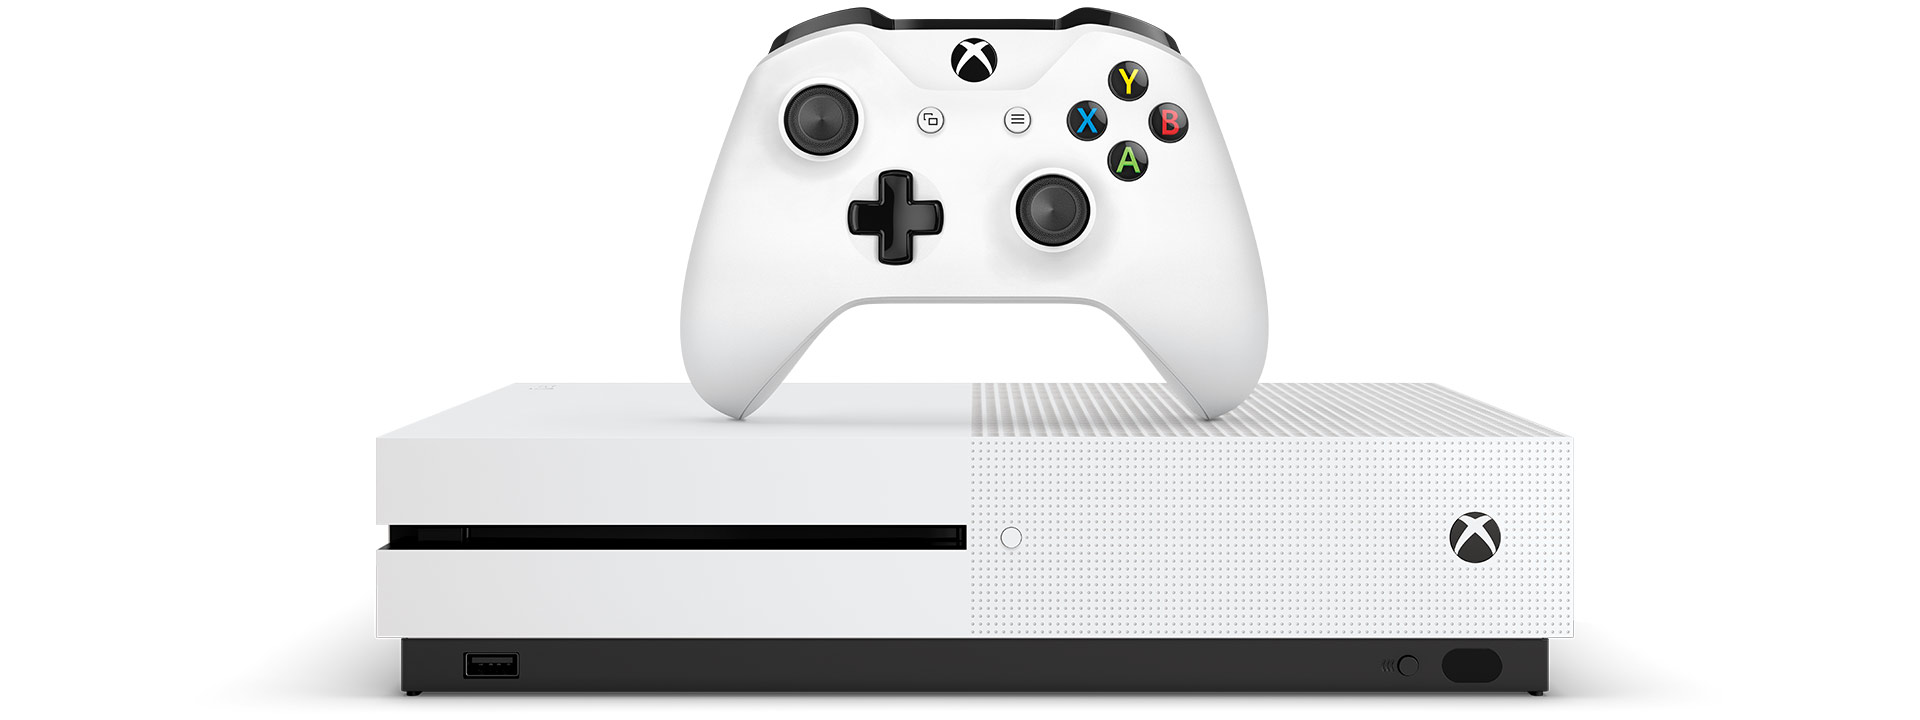 cheap xbox one s wireless controller